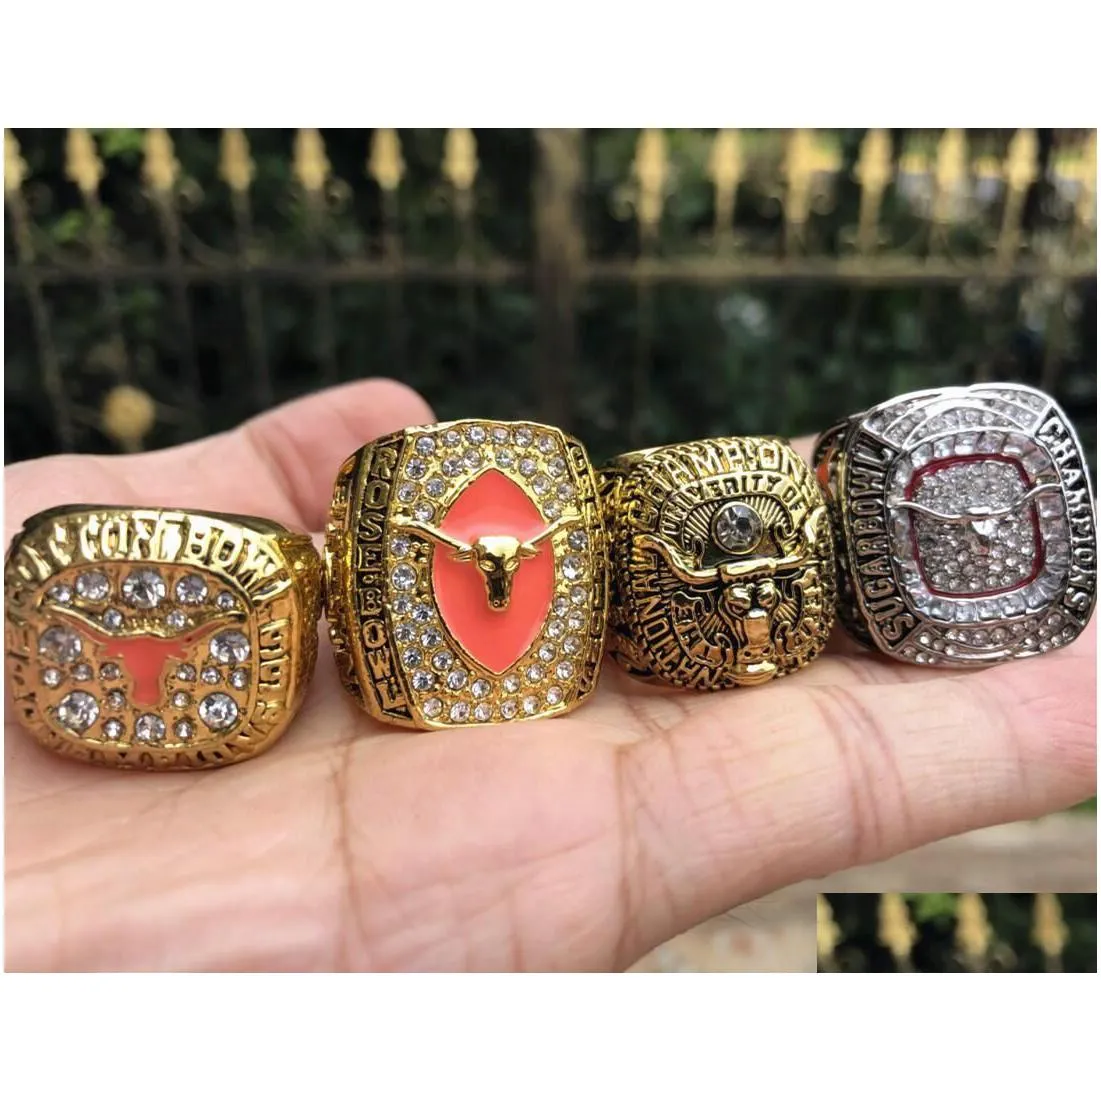 With Side Stones 4Pcs Texas Longhorn Rose Bowl Sec Team Champions Championship Ring With Wooden Box Men Fan Gift Wholesale Drop Drop D Dhrvm